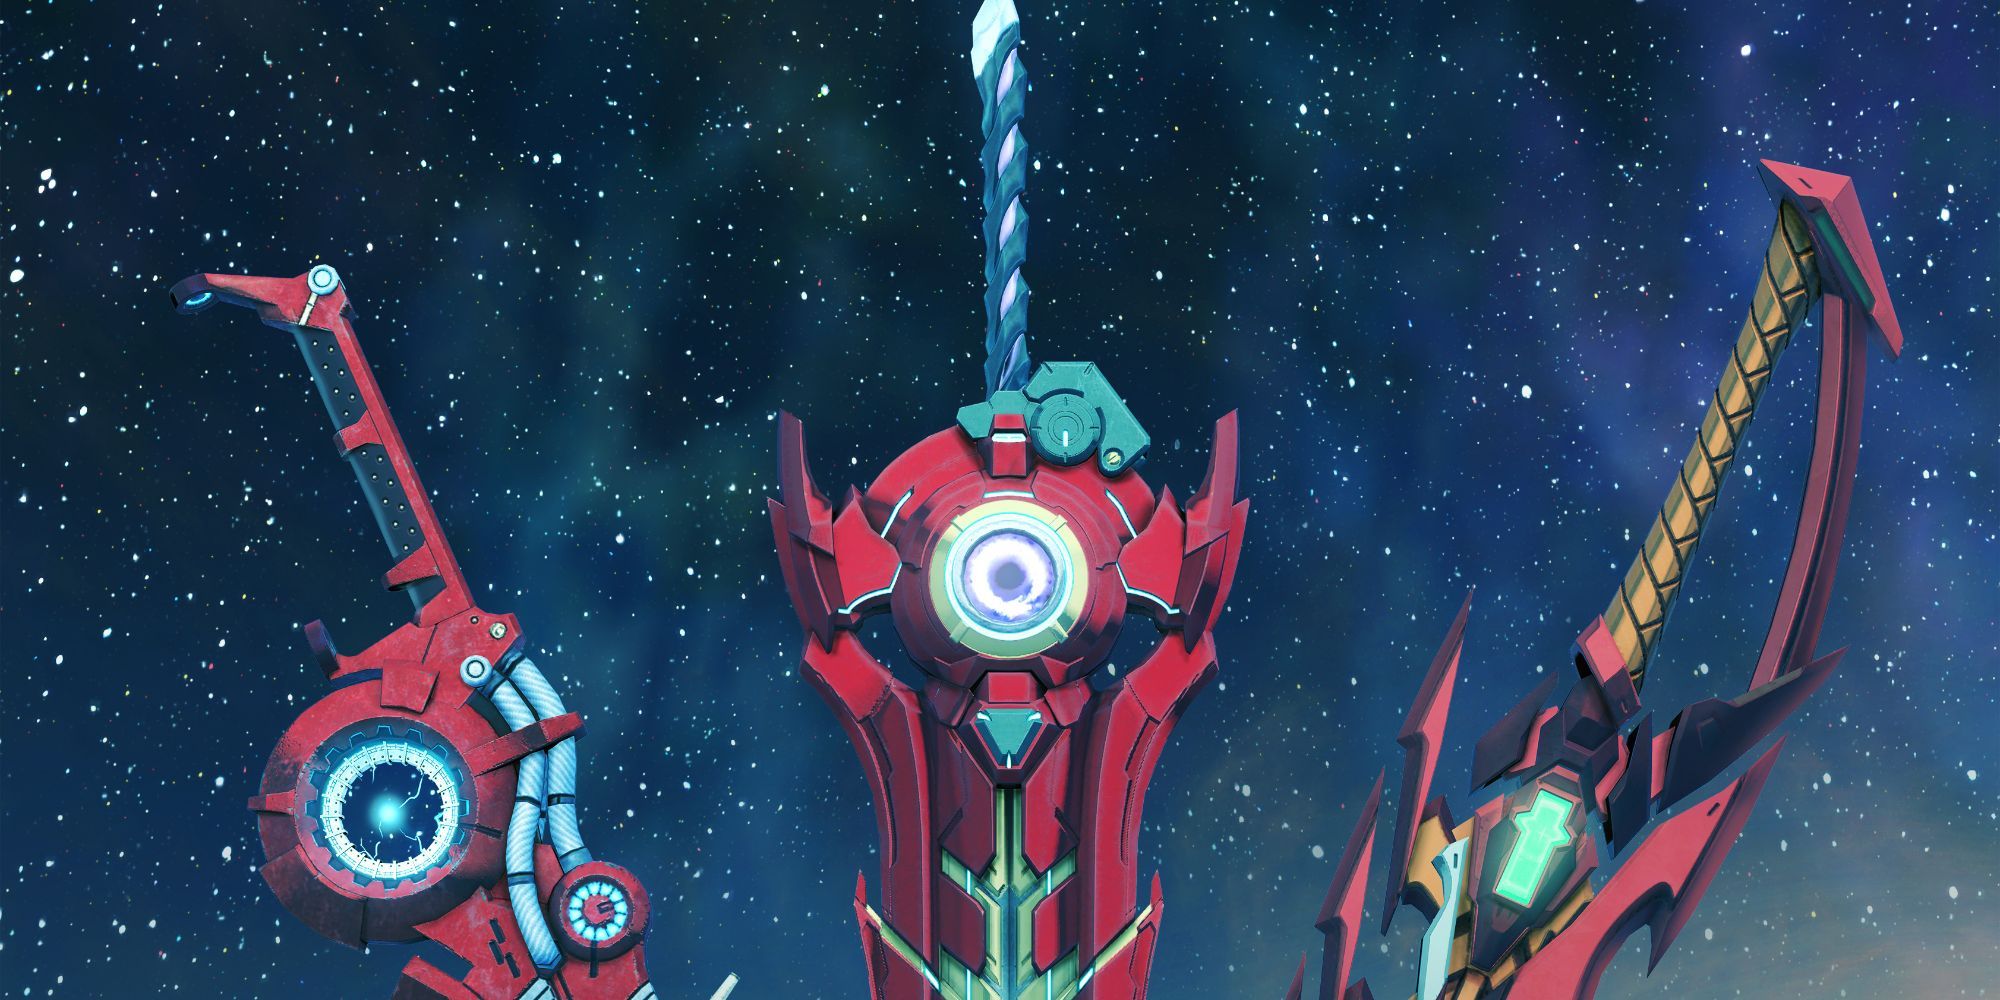 Xenoblade Chronicles - All three swords from the main characters show in promo art